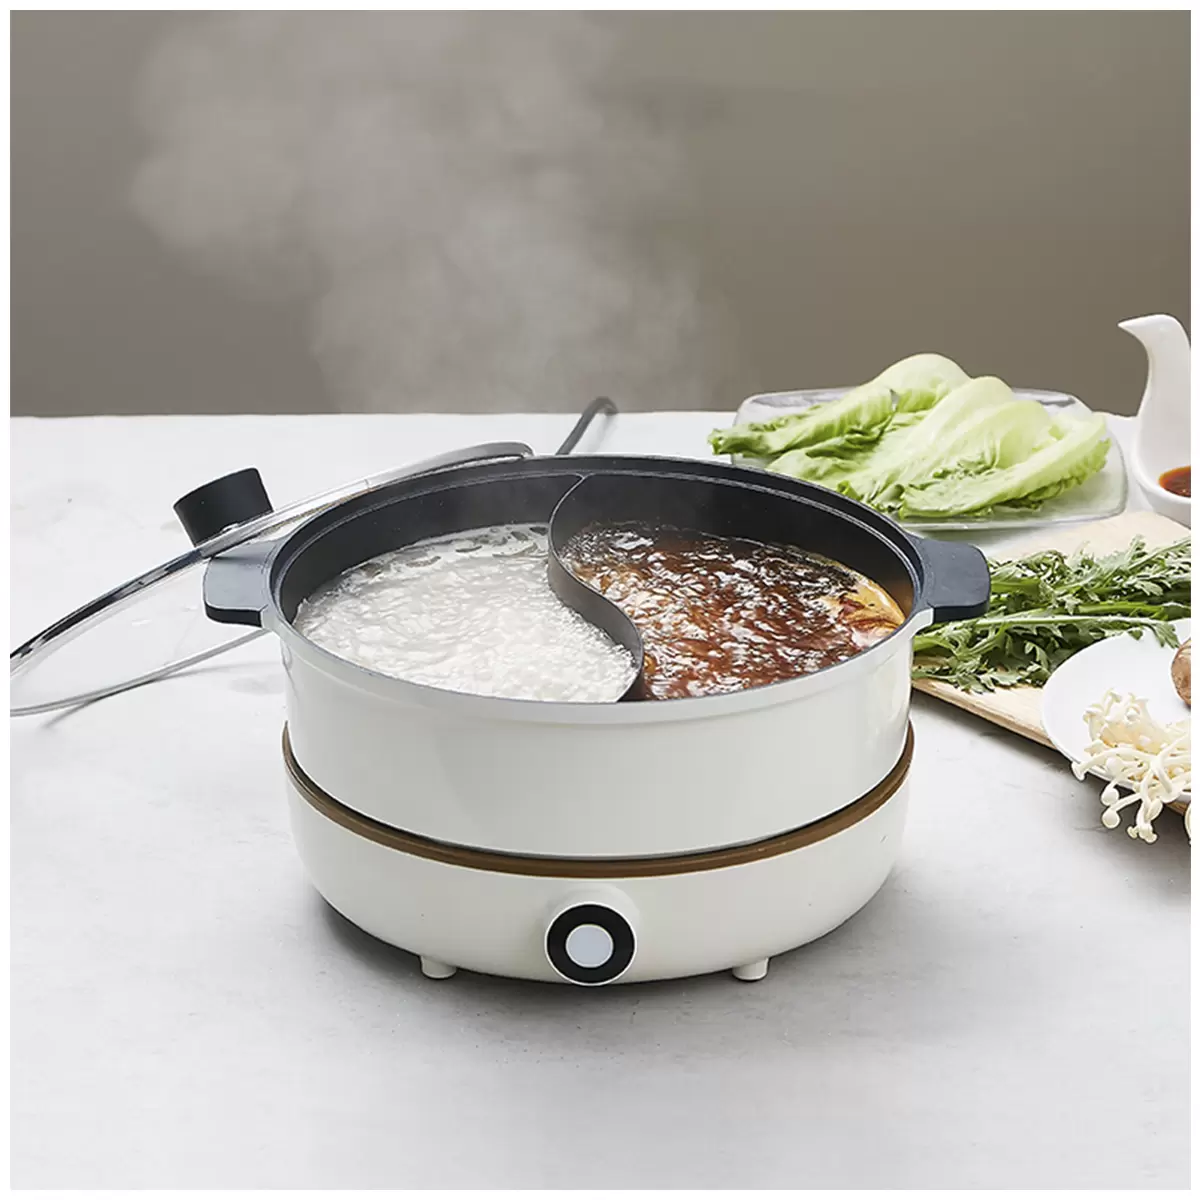 Joyoung C21-CL1 IH Induction Hotpot with Divider